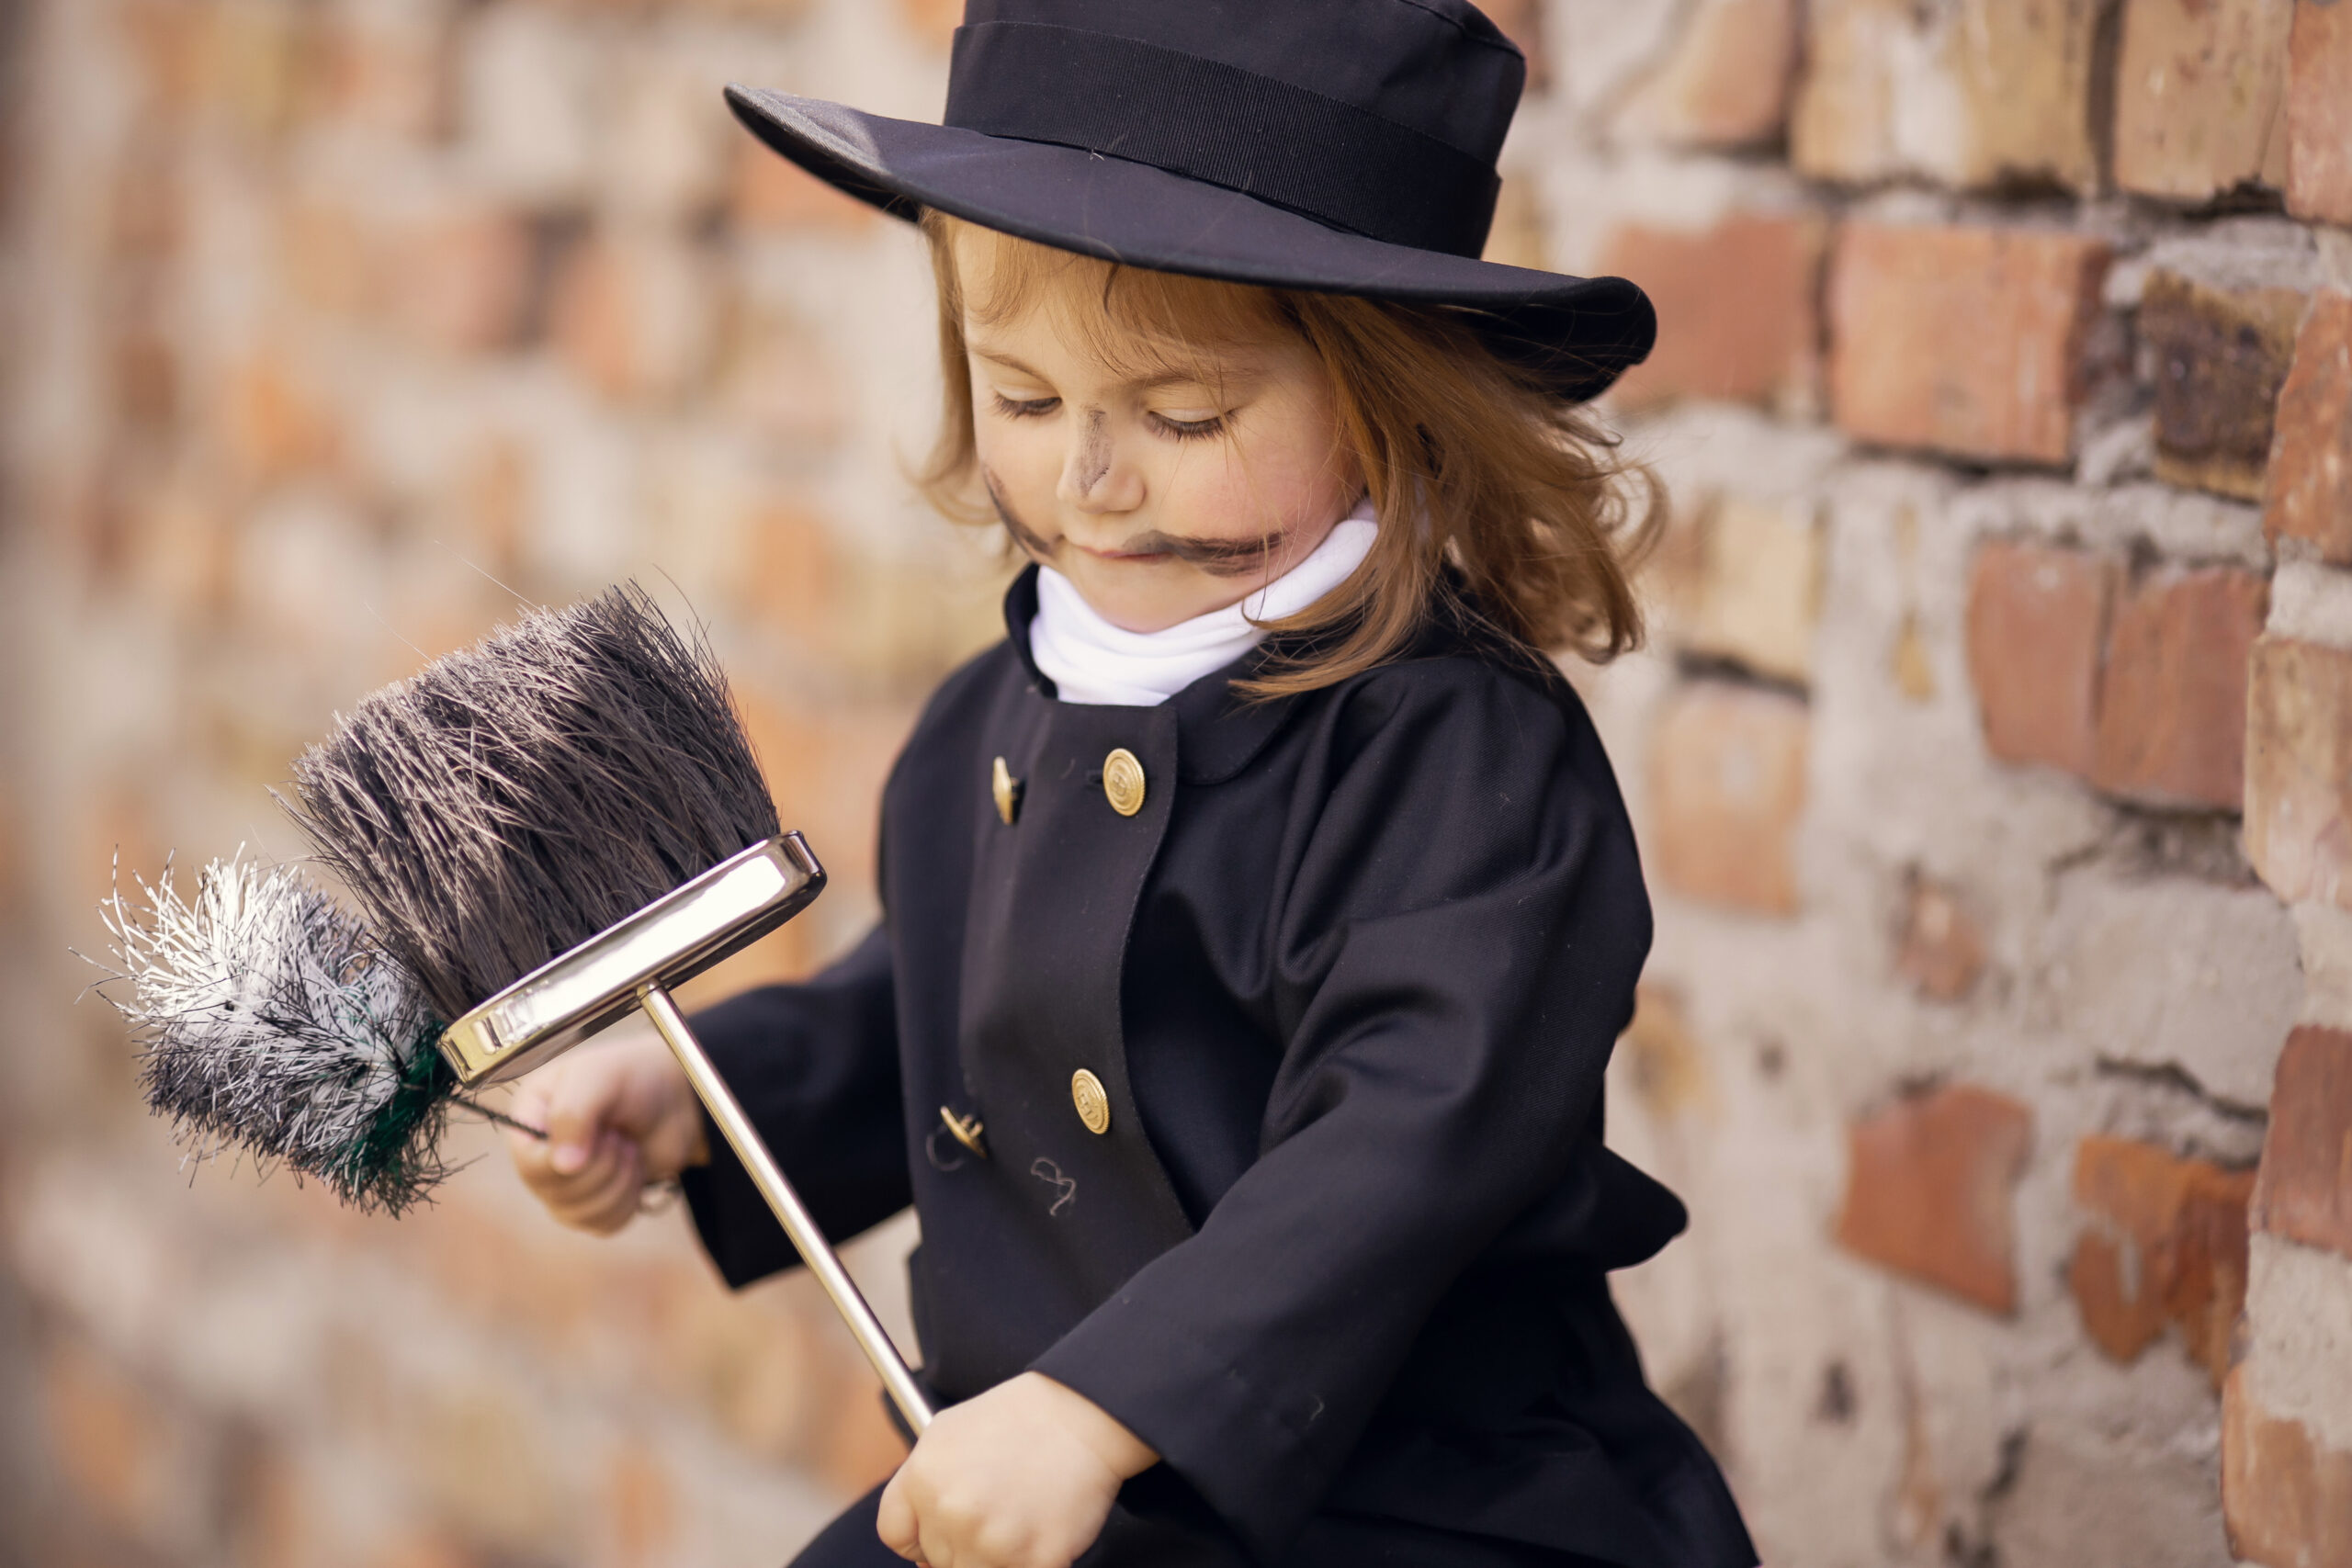 Girl as a chimney sweep against brick wall.